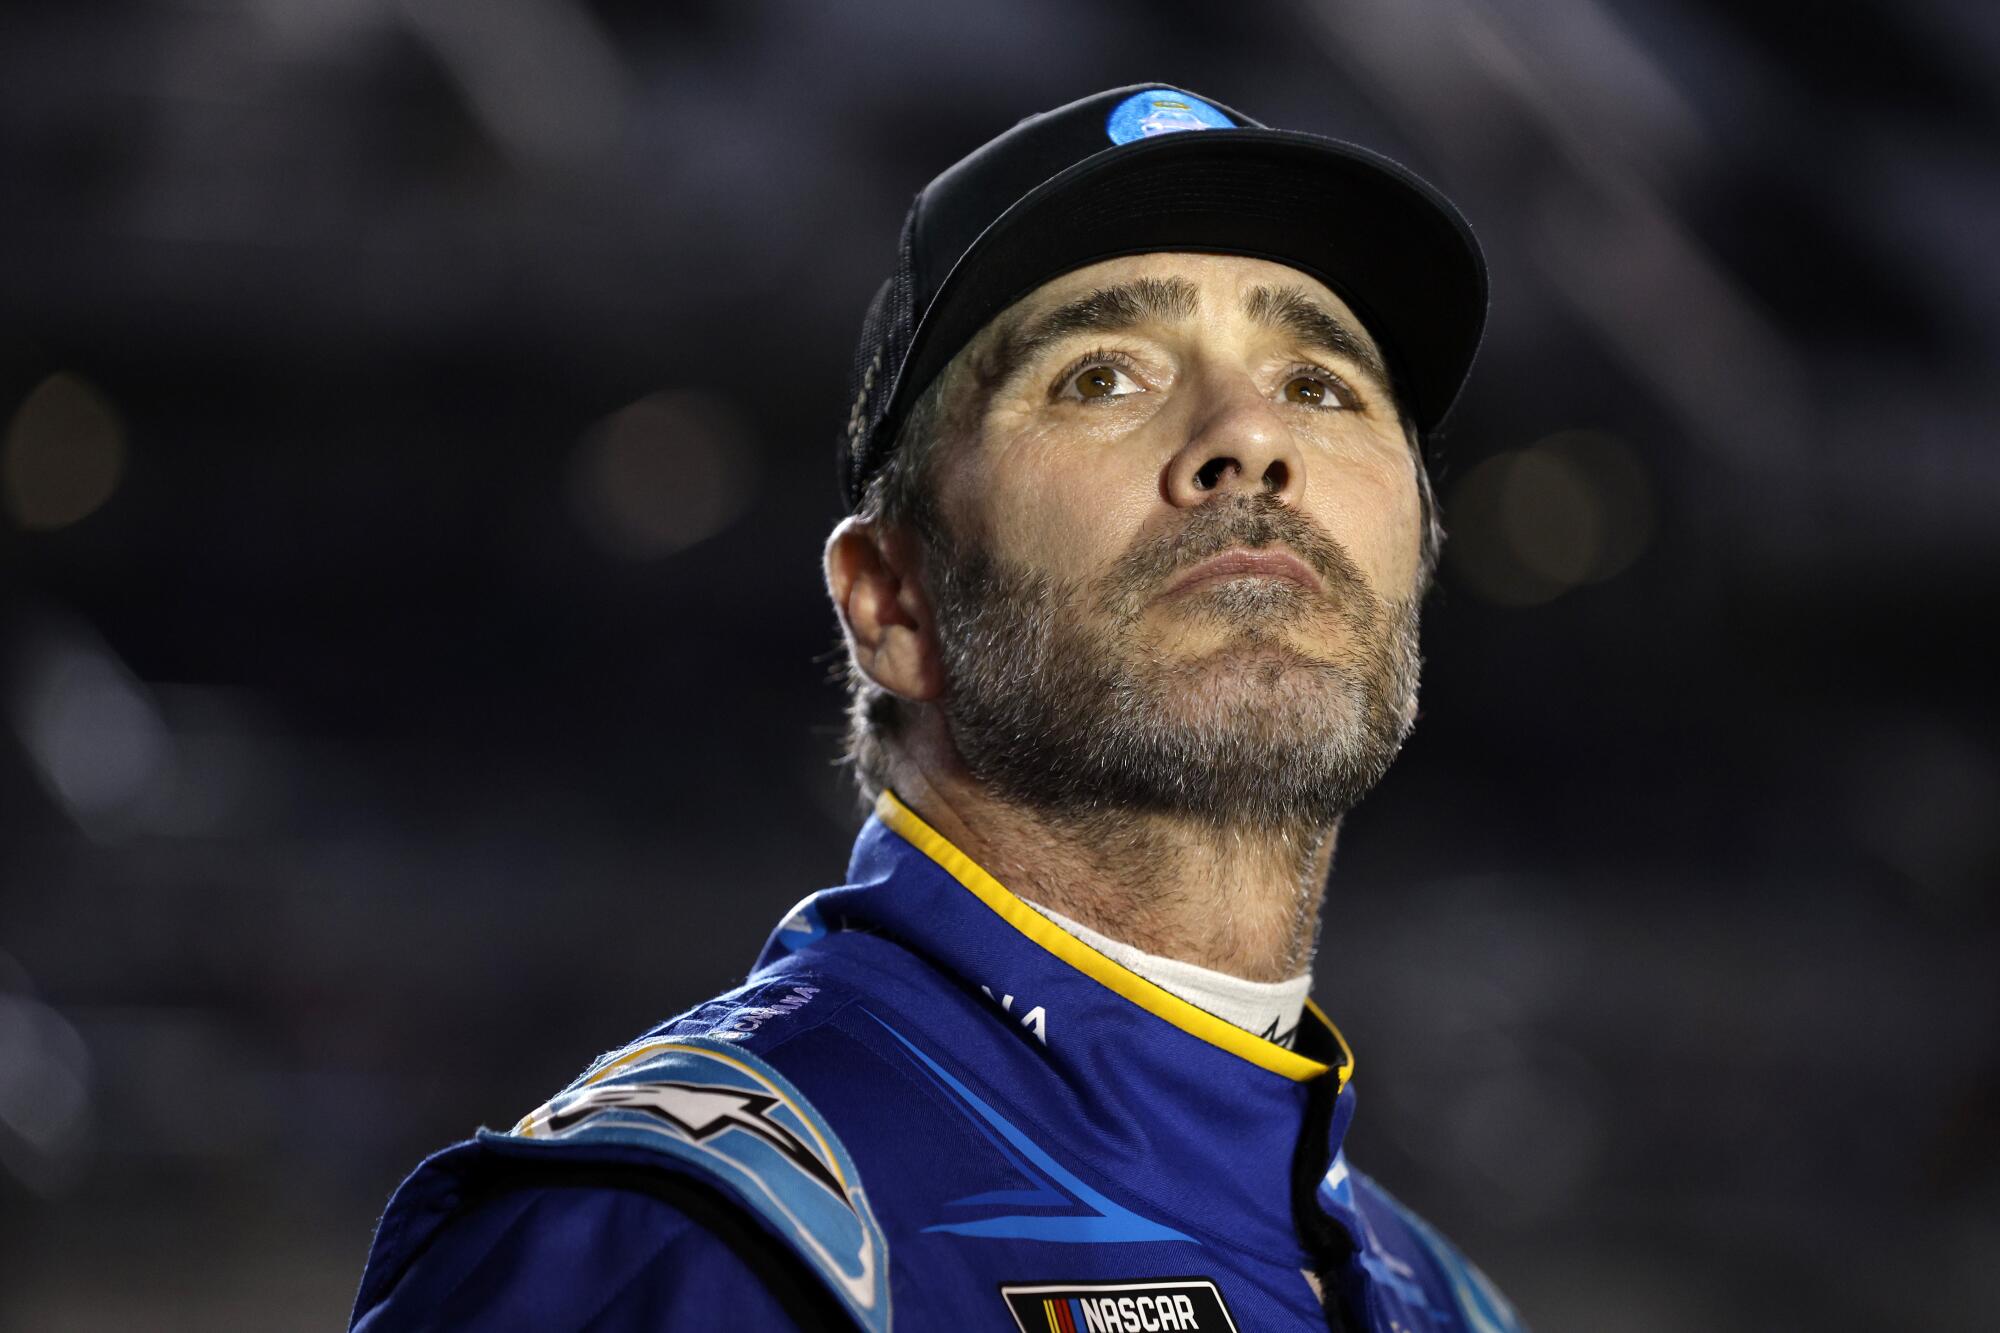 Jimmie Johnson looks up into the stands at Daytona International Raceway.